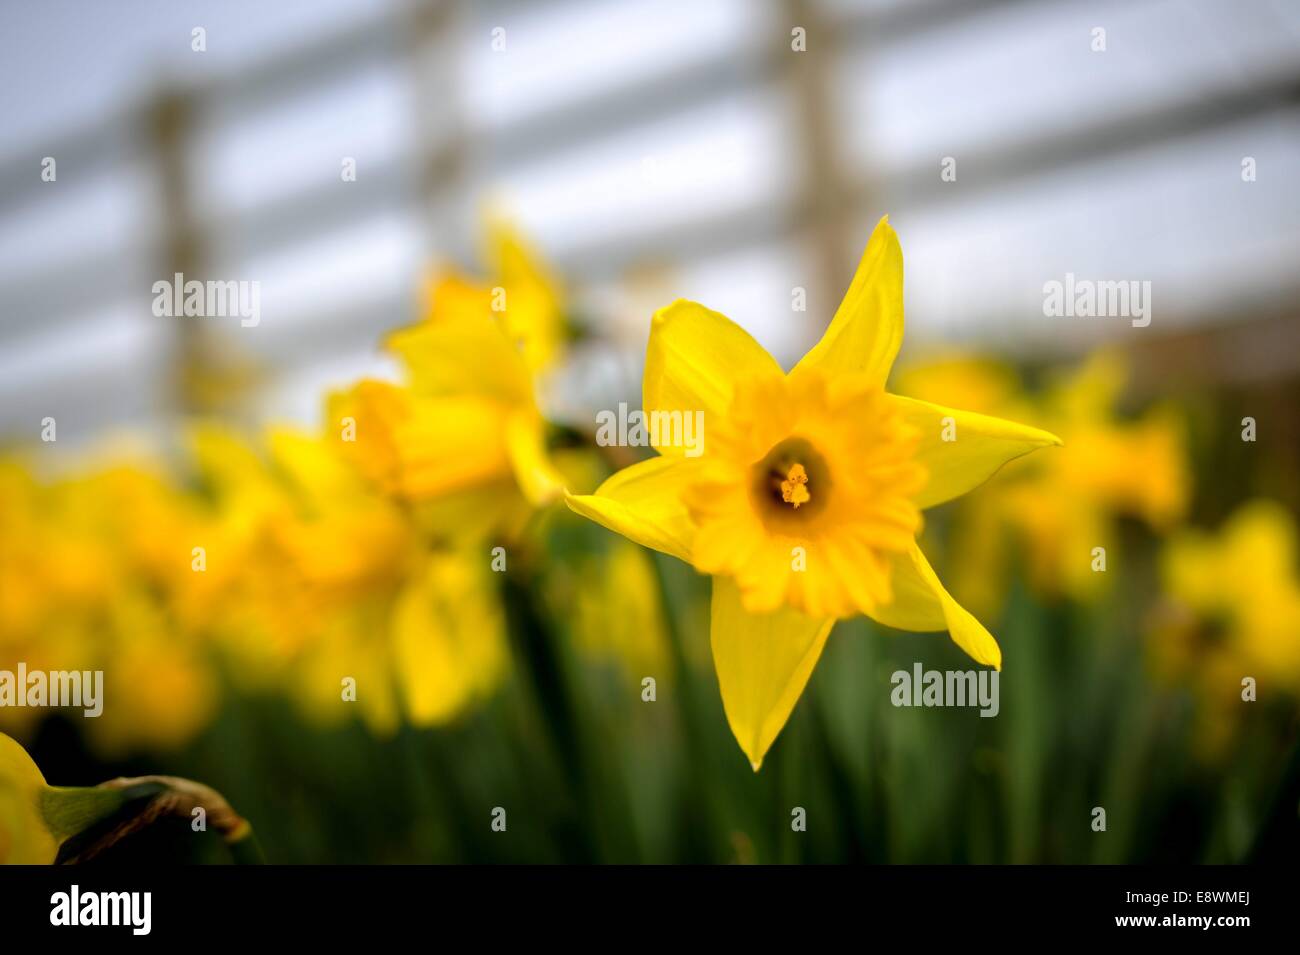 Daffodils are seen in bloom in a field near Ashby, England Stock Photo